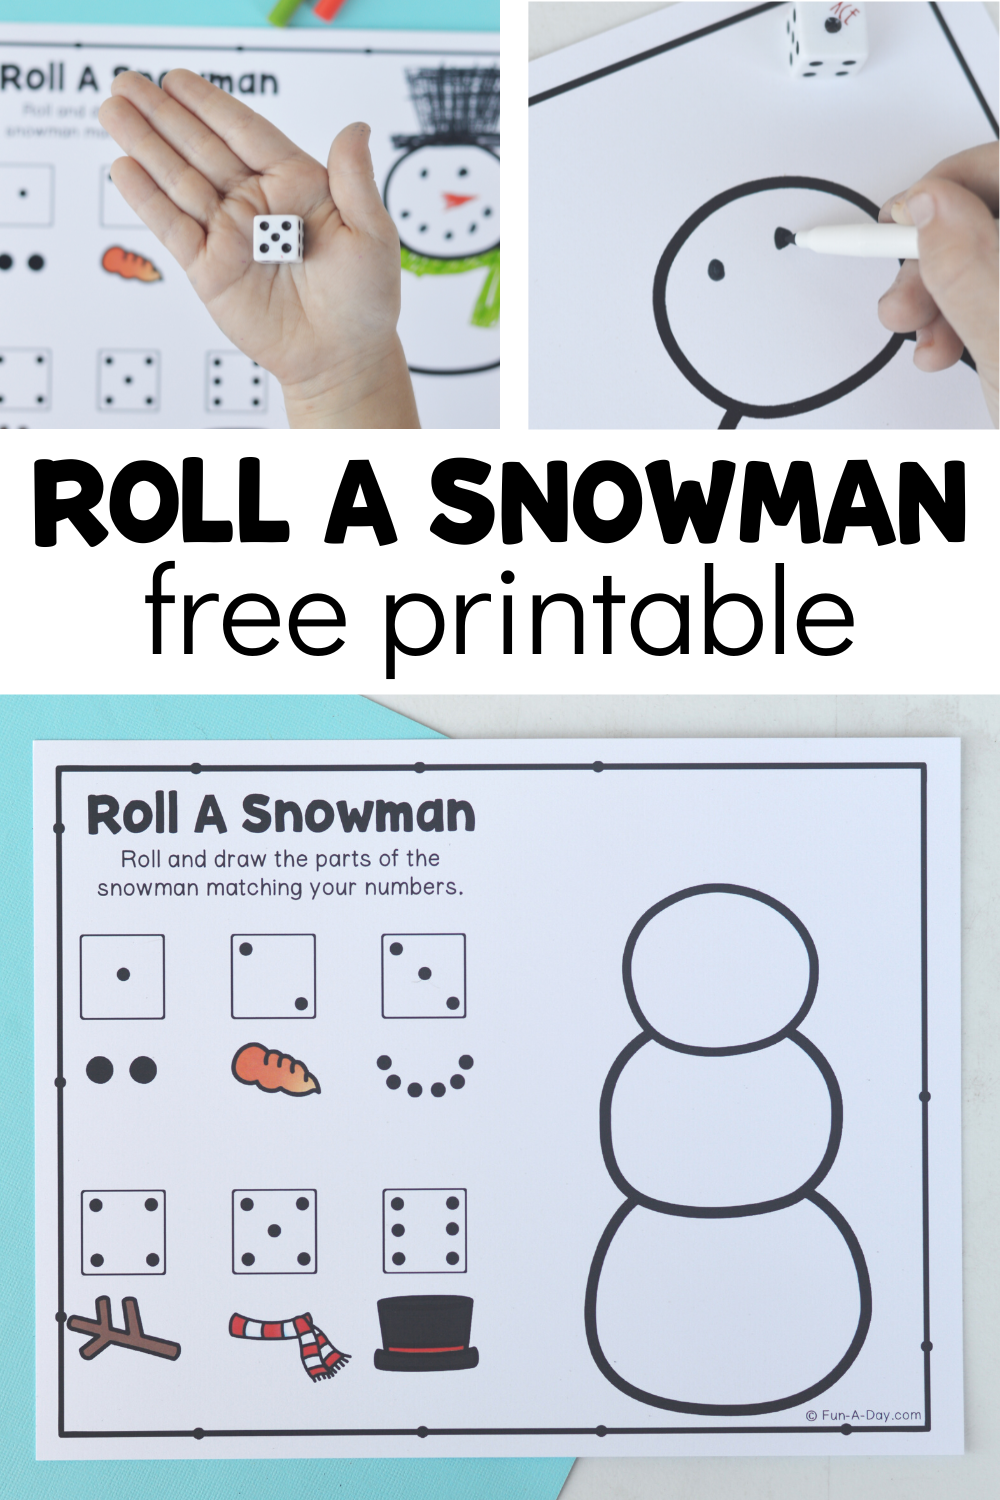 winter printable game with text that reads roll a snowman free printable